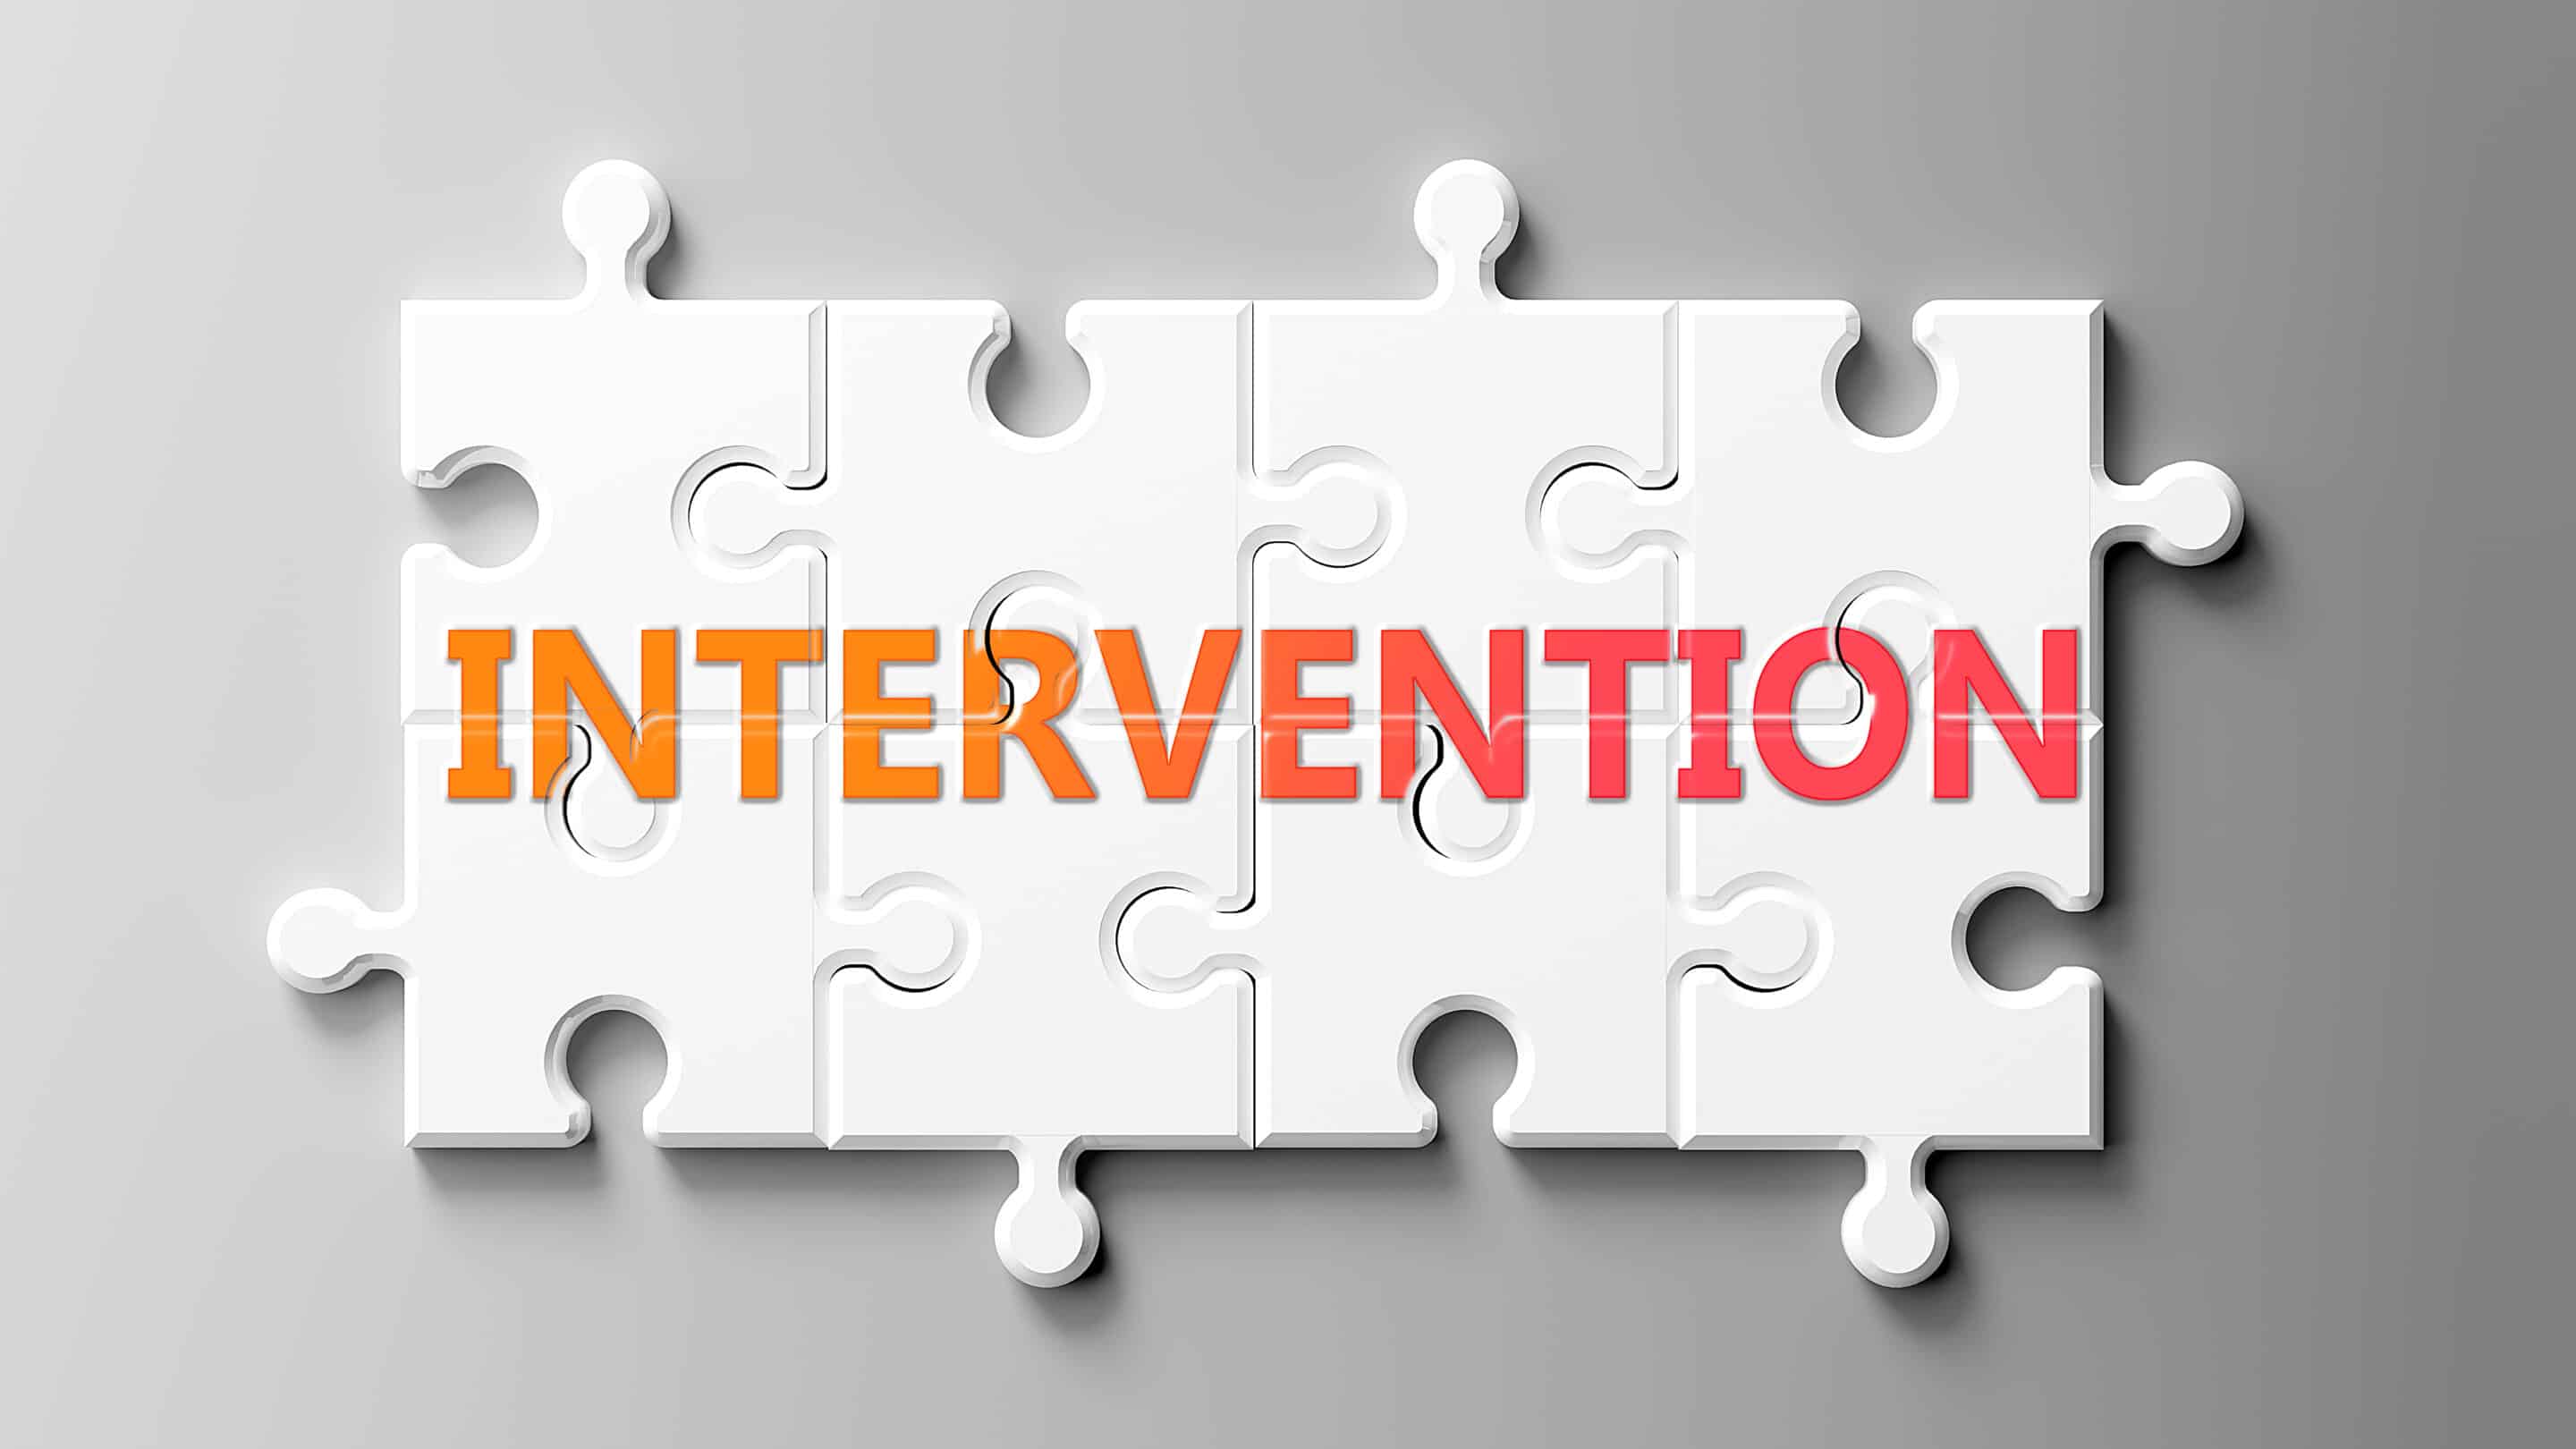 How Do Interventions Work?